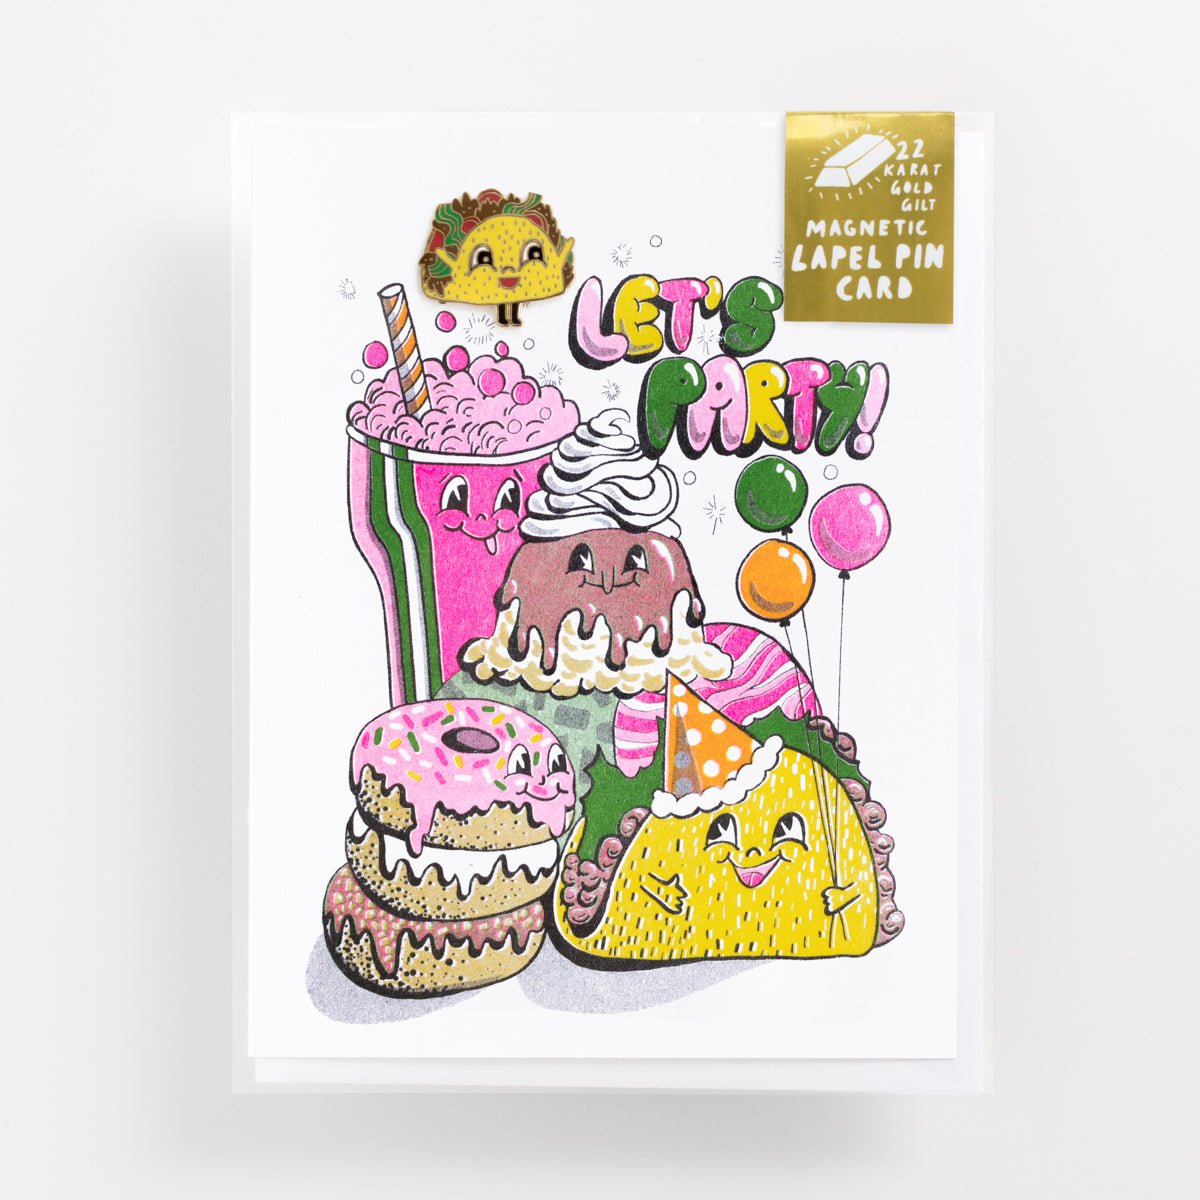 Let&#39;s Party - Lapel Pin Card - Yellow Owl Workshop